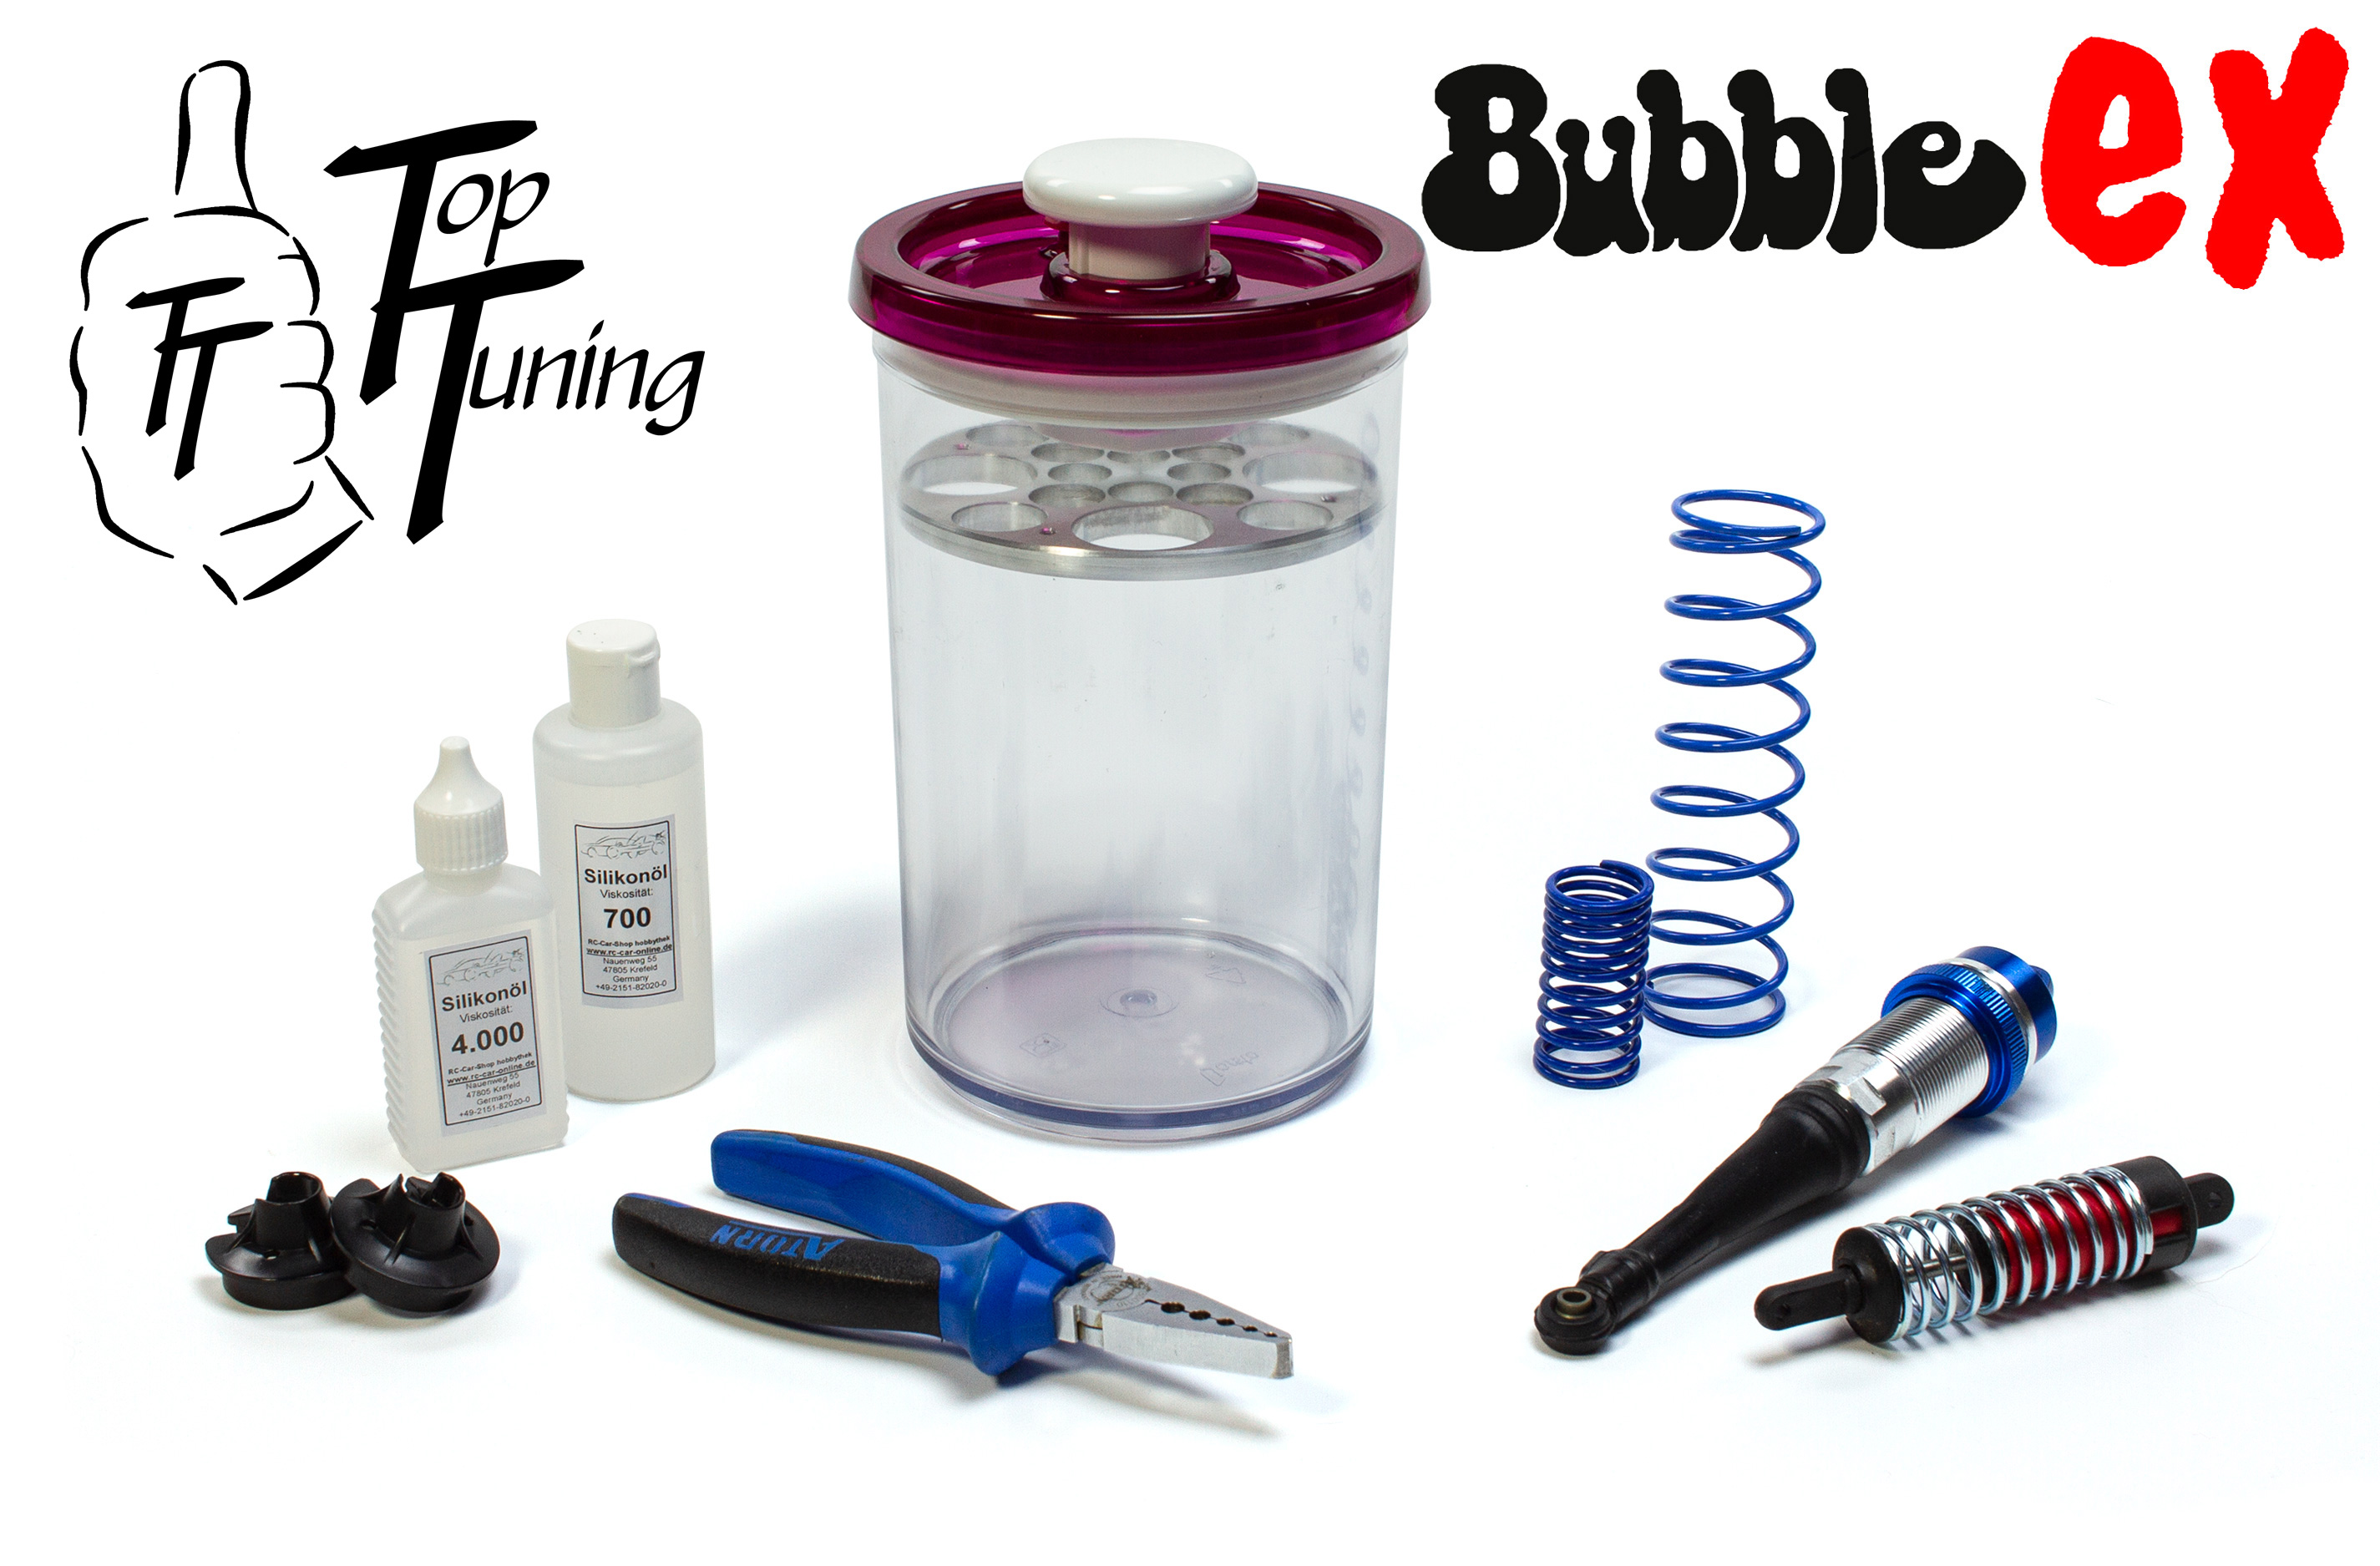 TT0198 Top Tuning Bubble-Ex for 1/10 up to 1/5 scale rc-cars